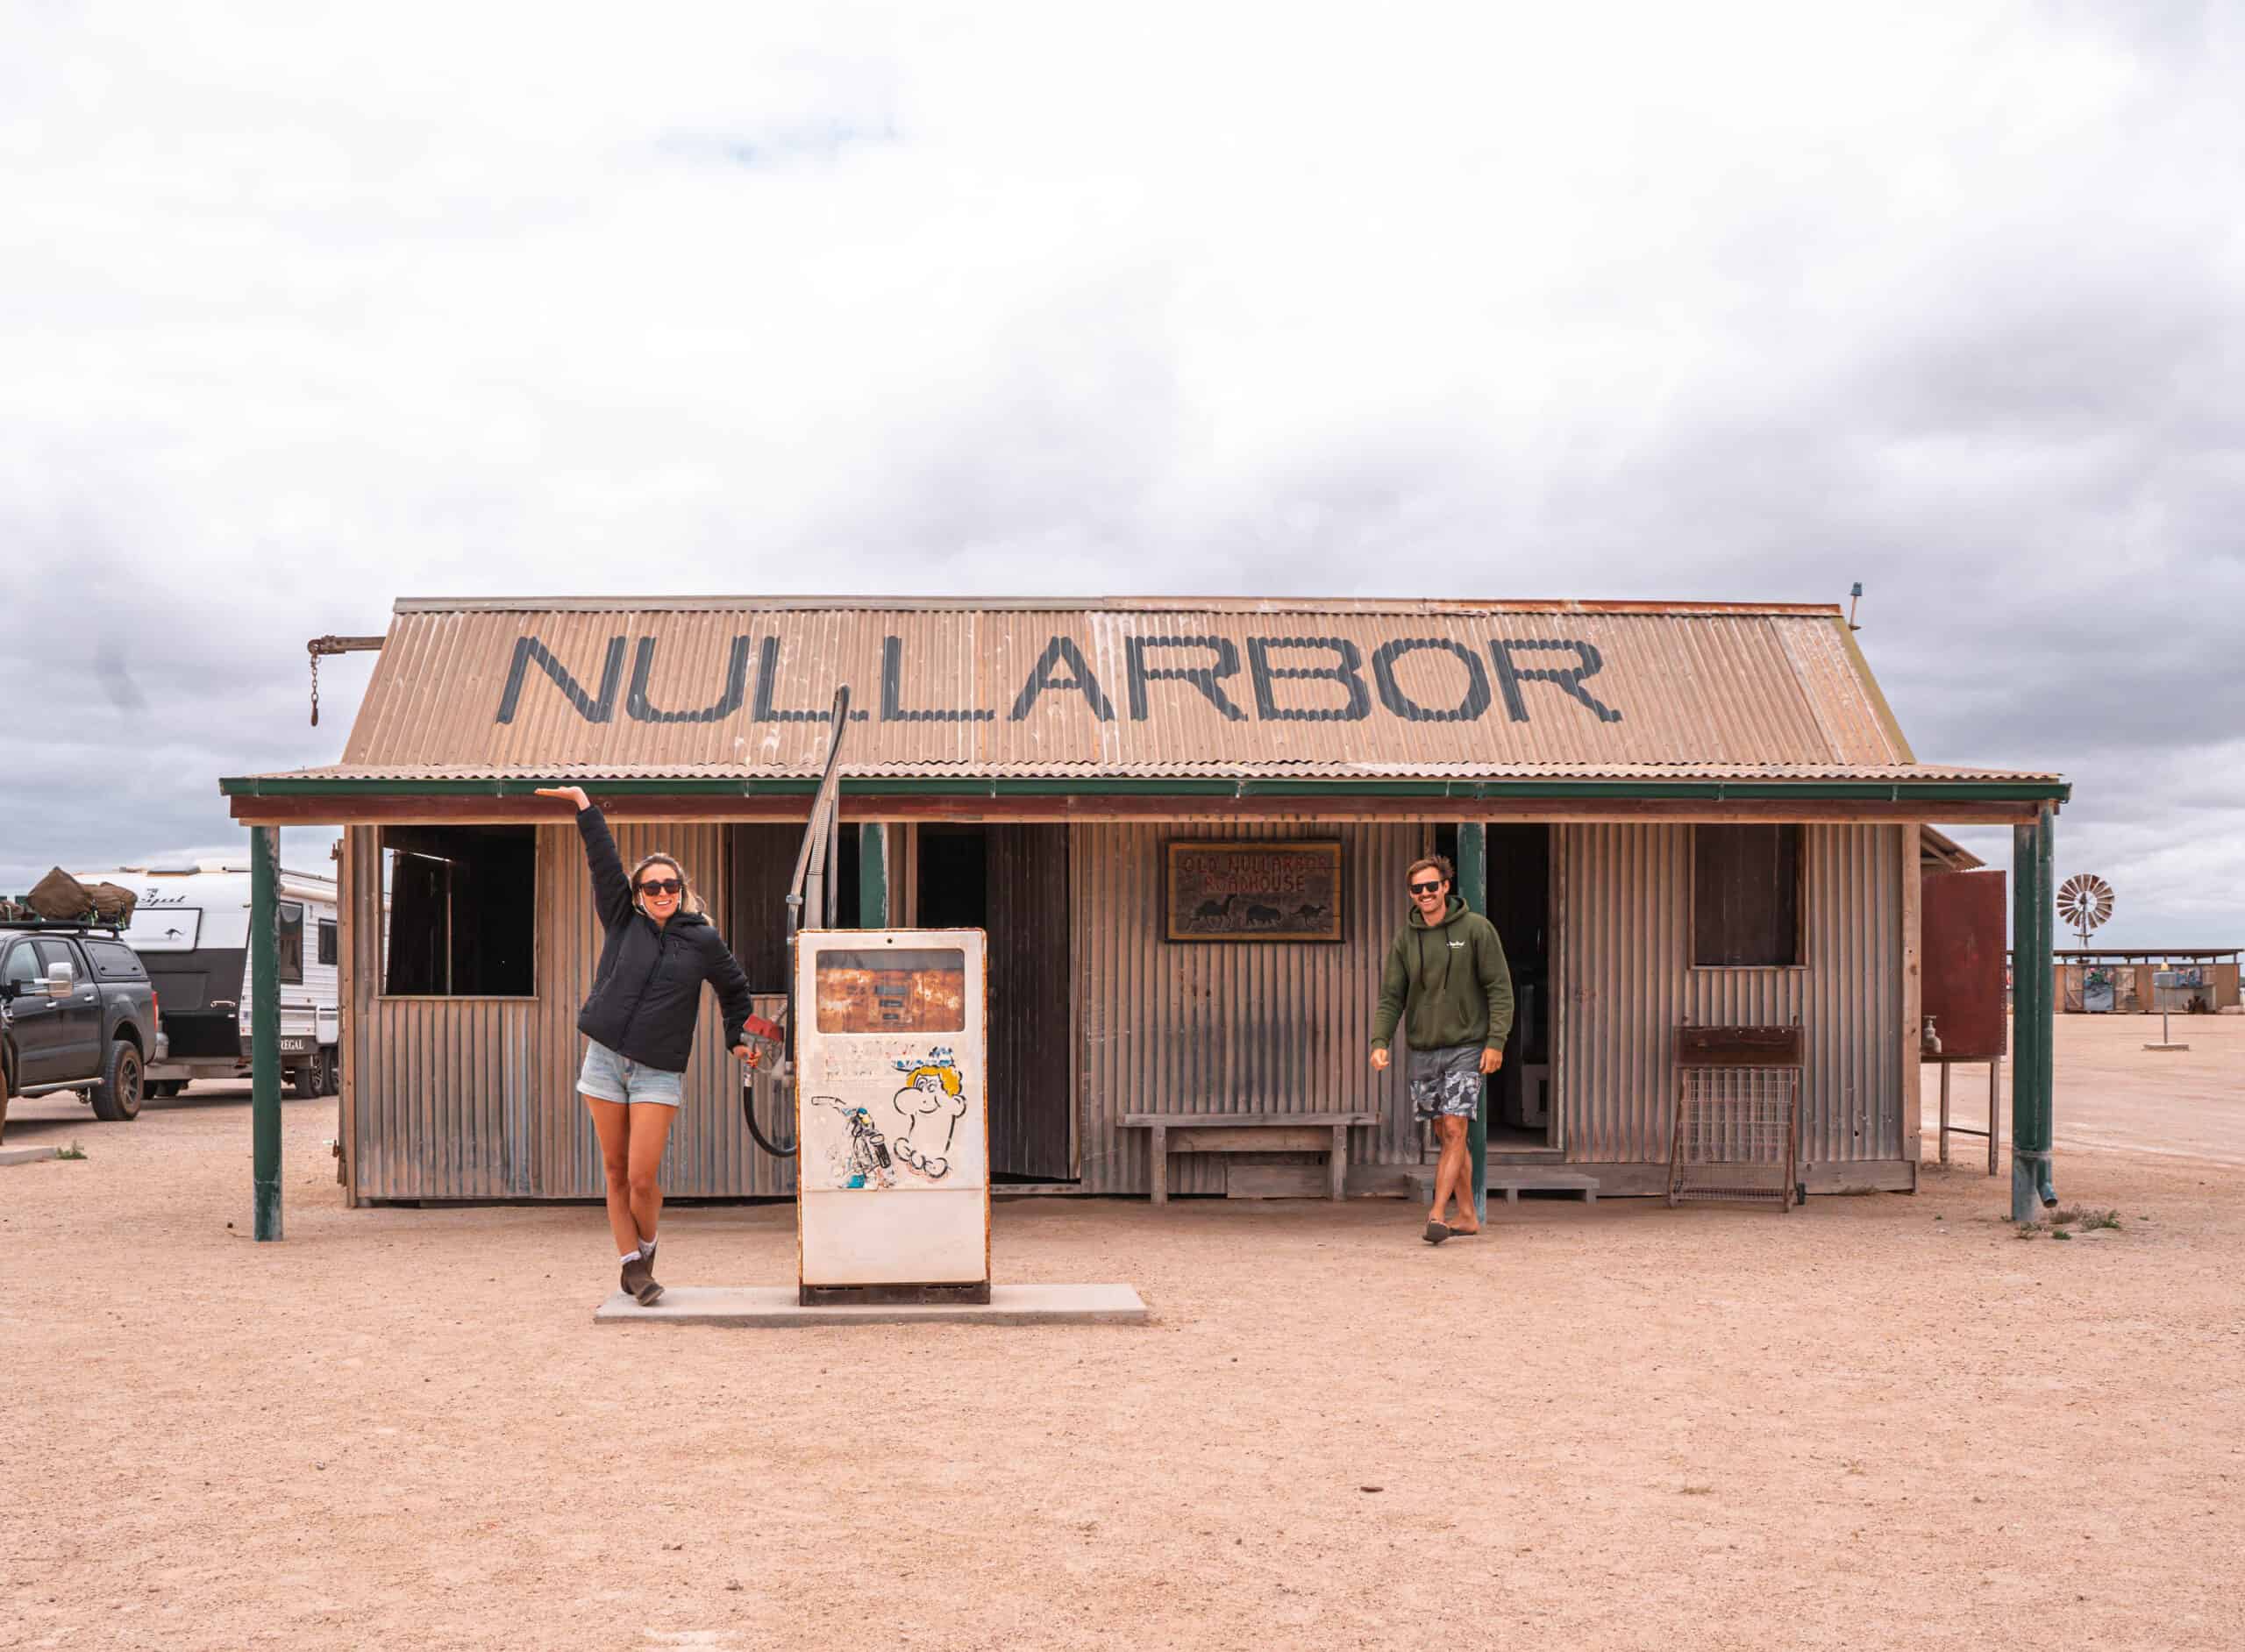 The old Nullabora Road House petrol pump